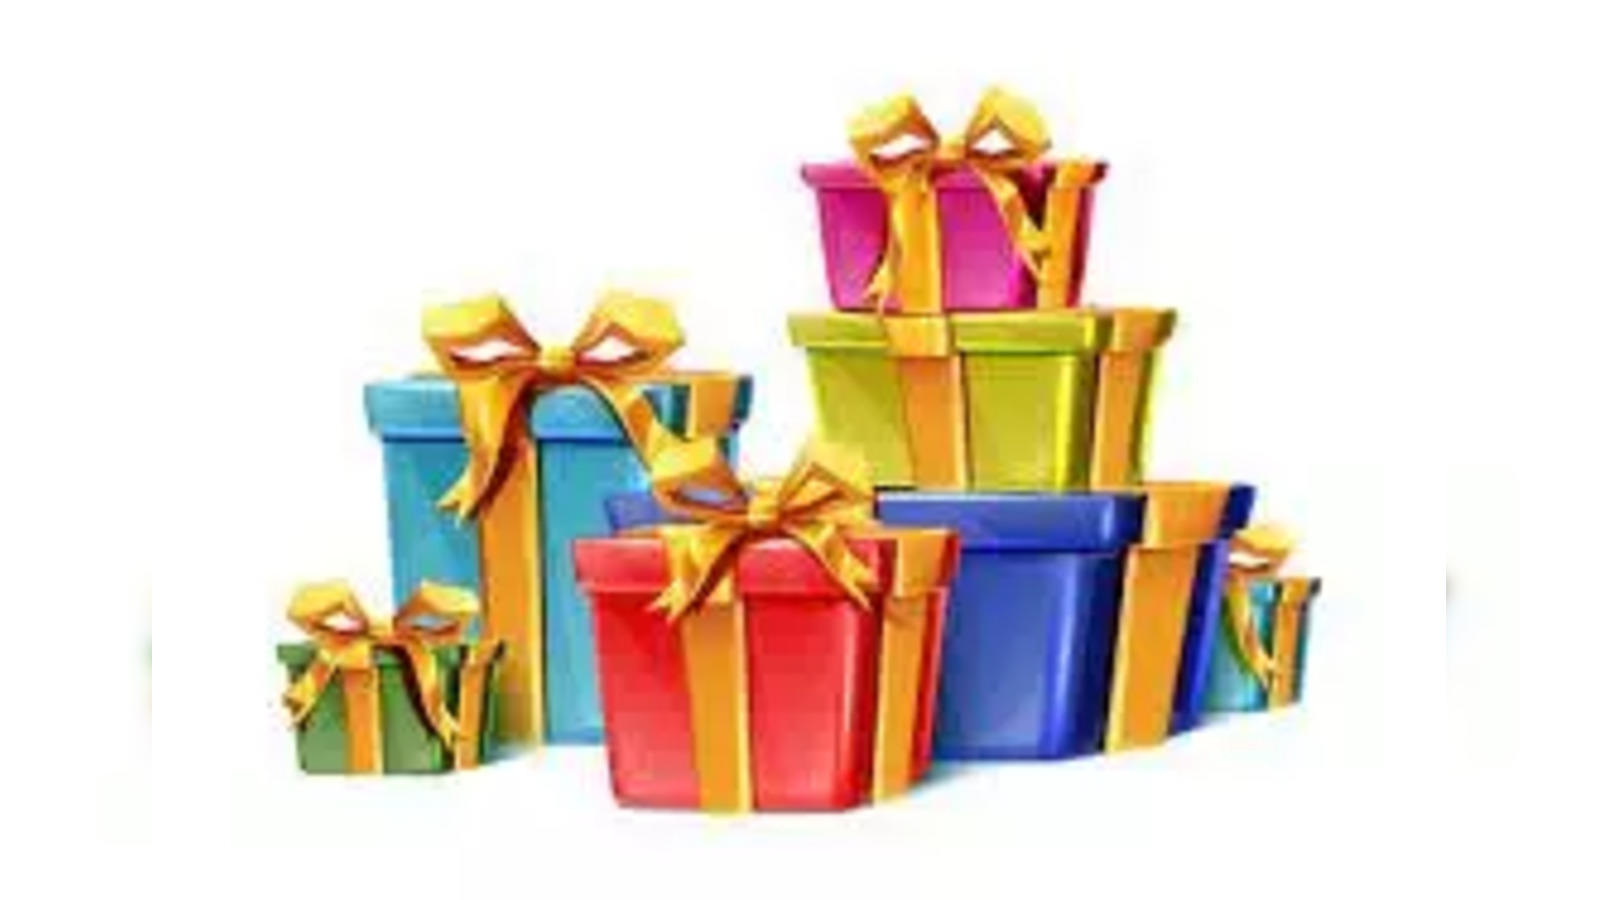 Ksr Customized Gifts, New Hafeezpet - Gift Shops in Hyderabad - Justdial